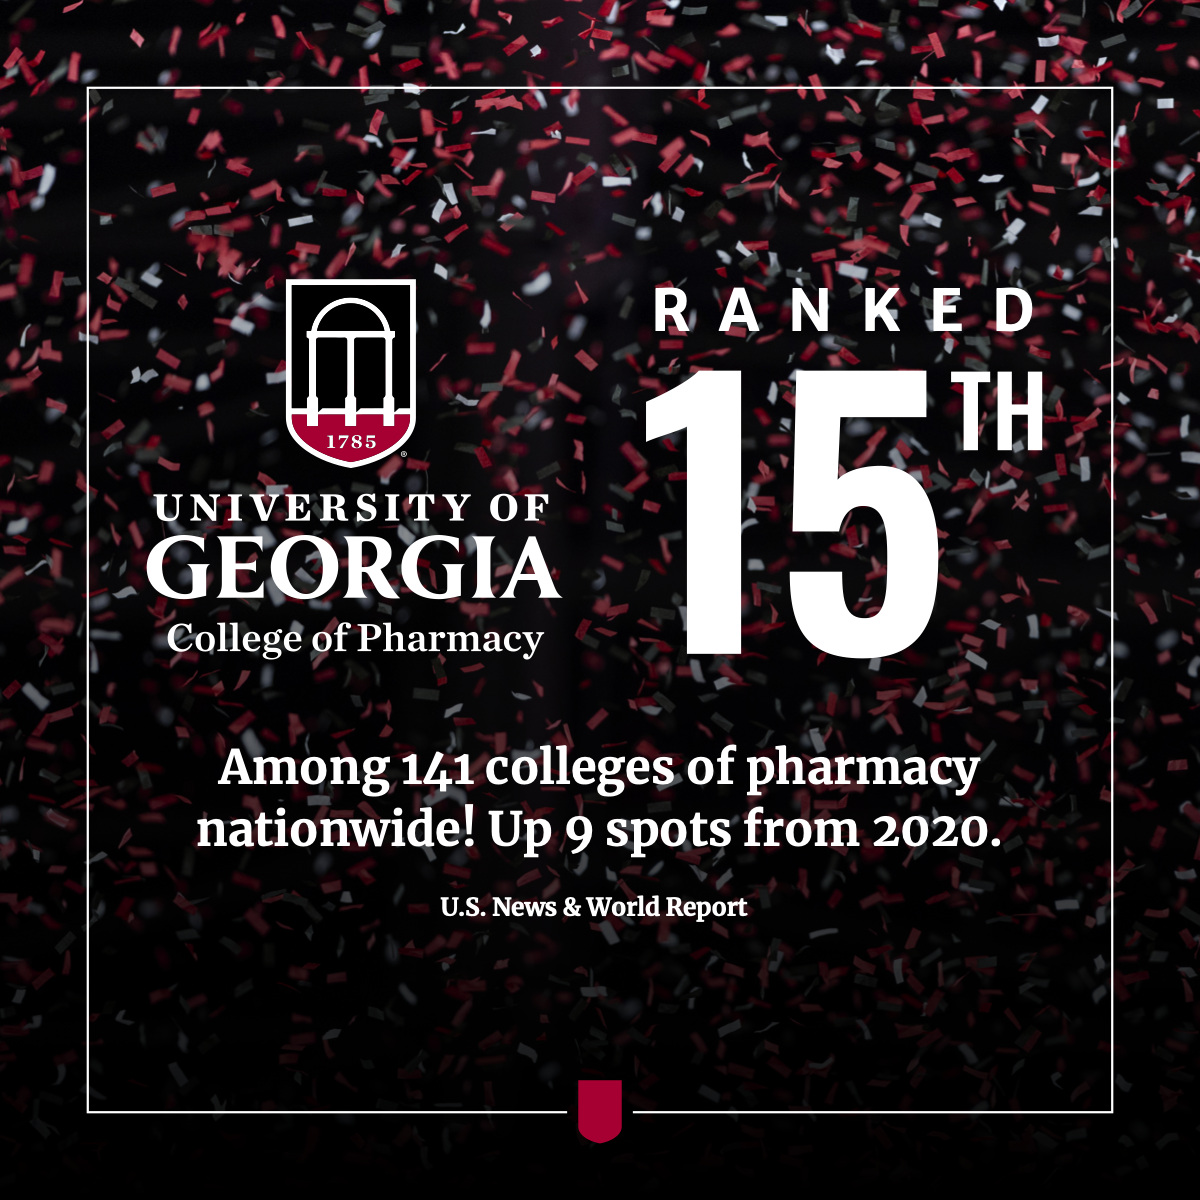 Up Nine Spots From Previous Ranking – UGA College of Pharmacy Ranked 15th by U.S. News & World Report